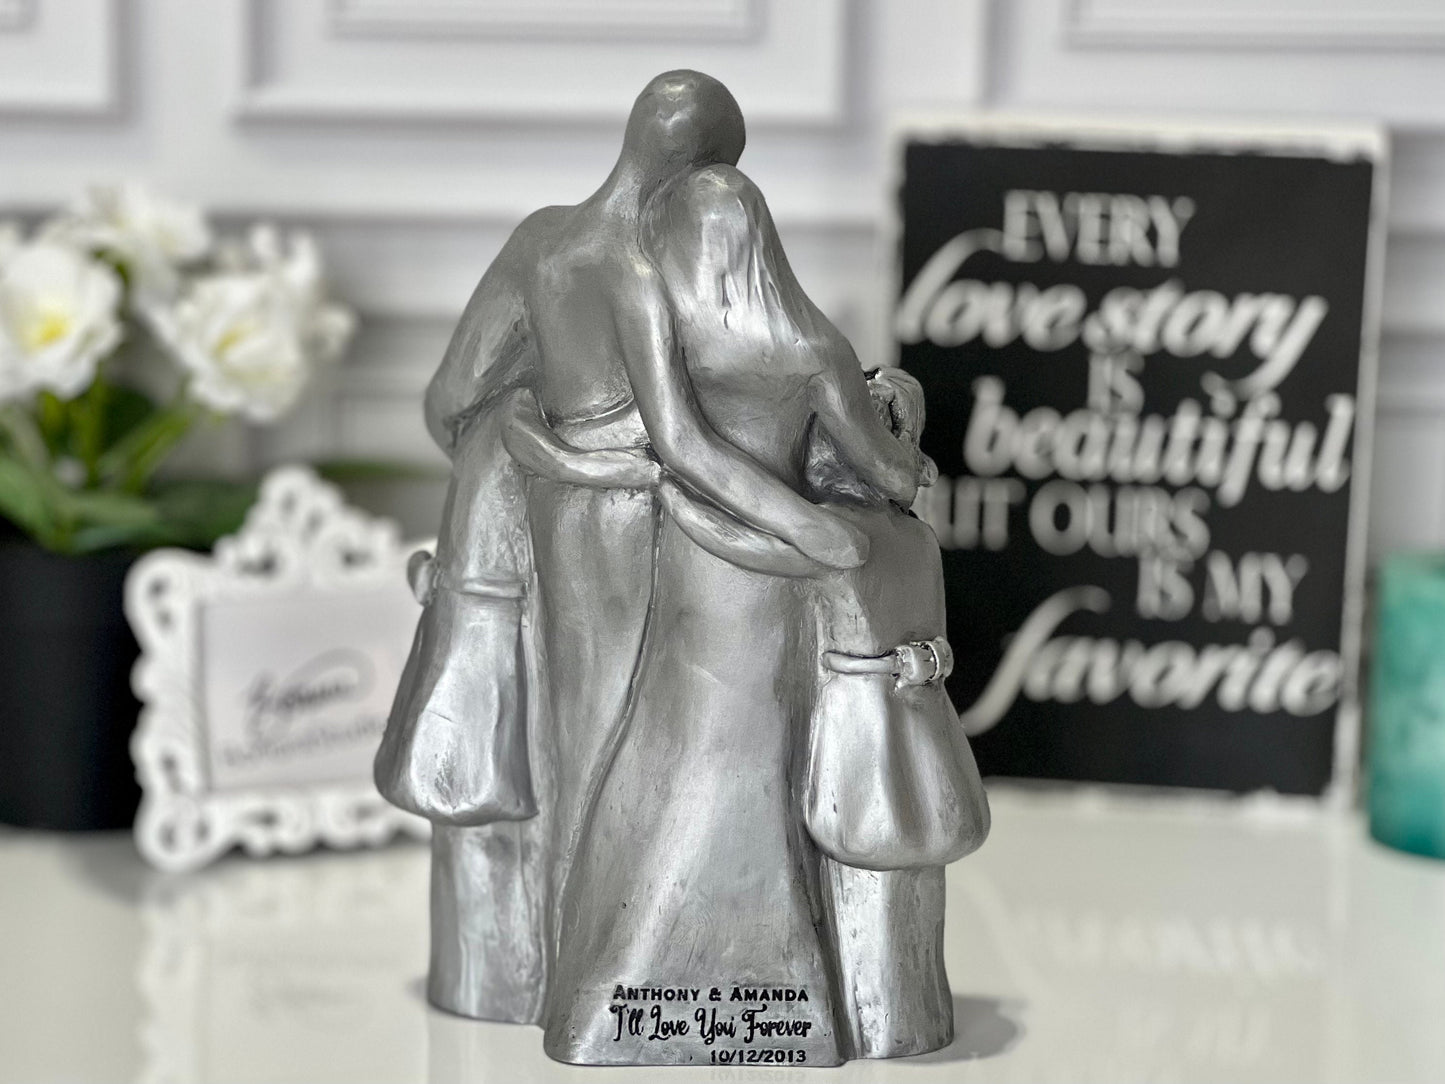 10 Year Anniversary Aluminum Sculpture, 10th Anniversary Family Portrait, Anniversary Gift for Men, Gift for Her Husband FO4-Older